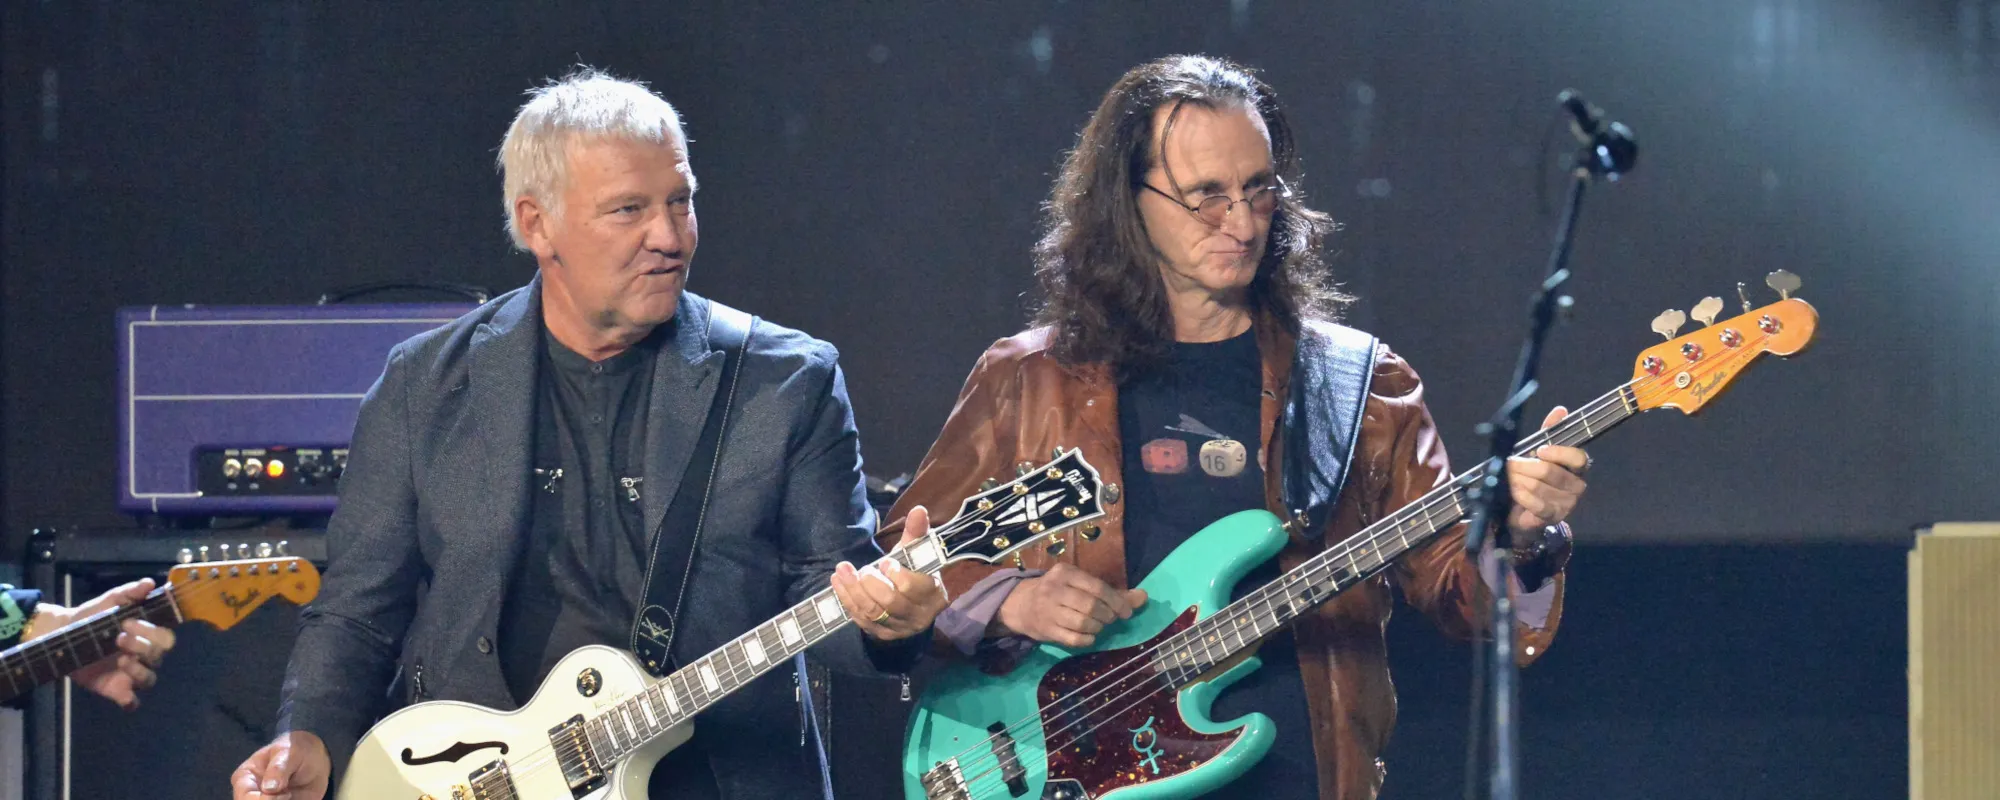 Alex Lifeson’s Bandmate, Andy Curran, Predicts Rush Reunion in 2024